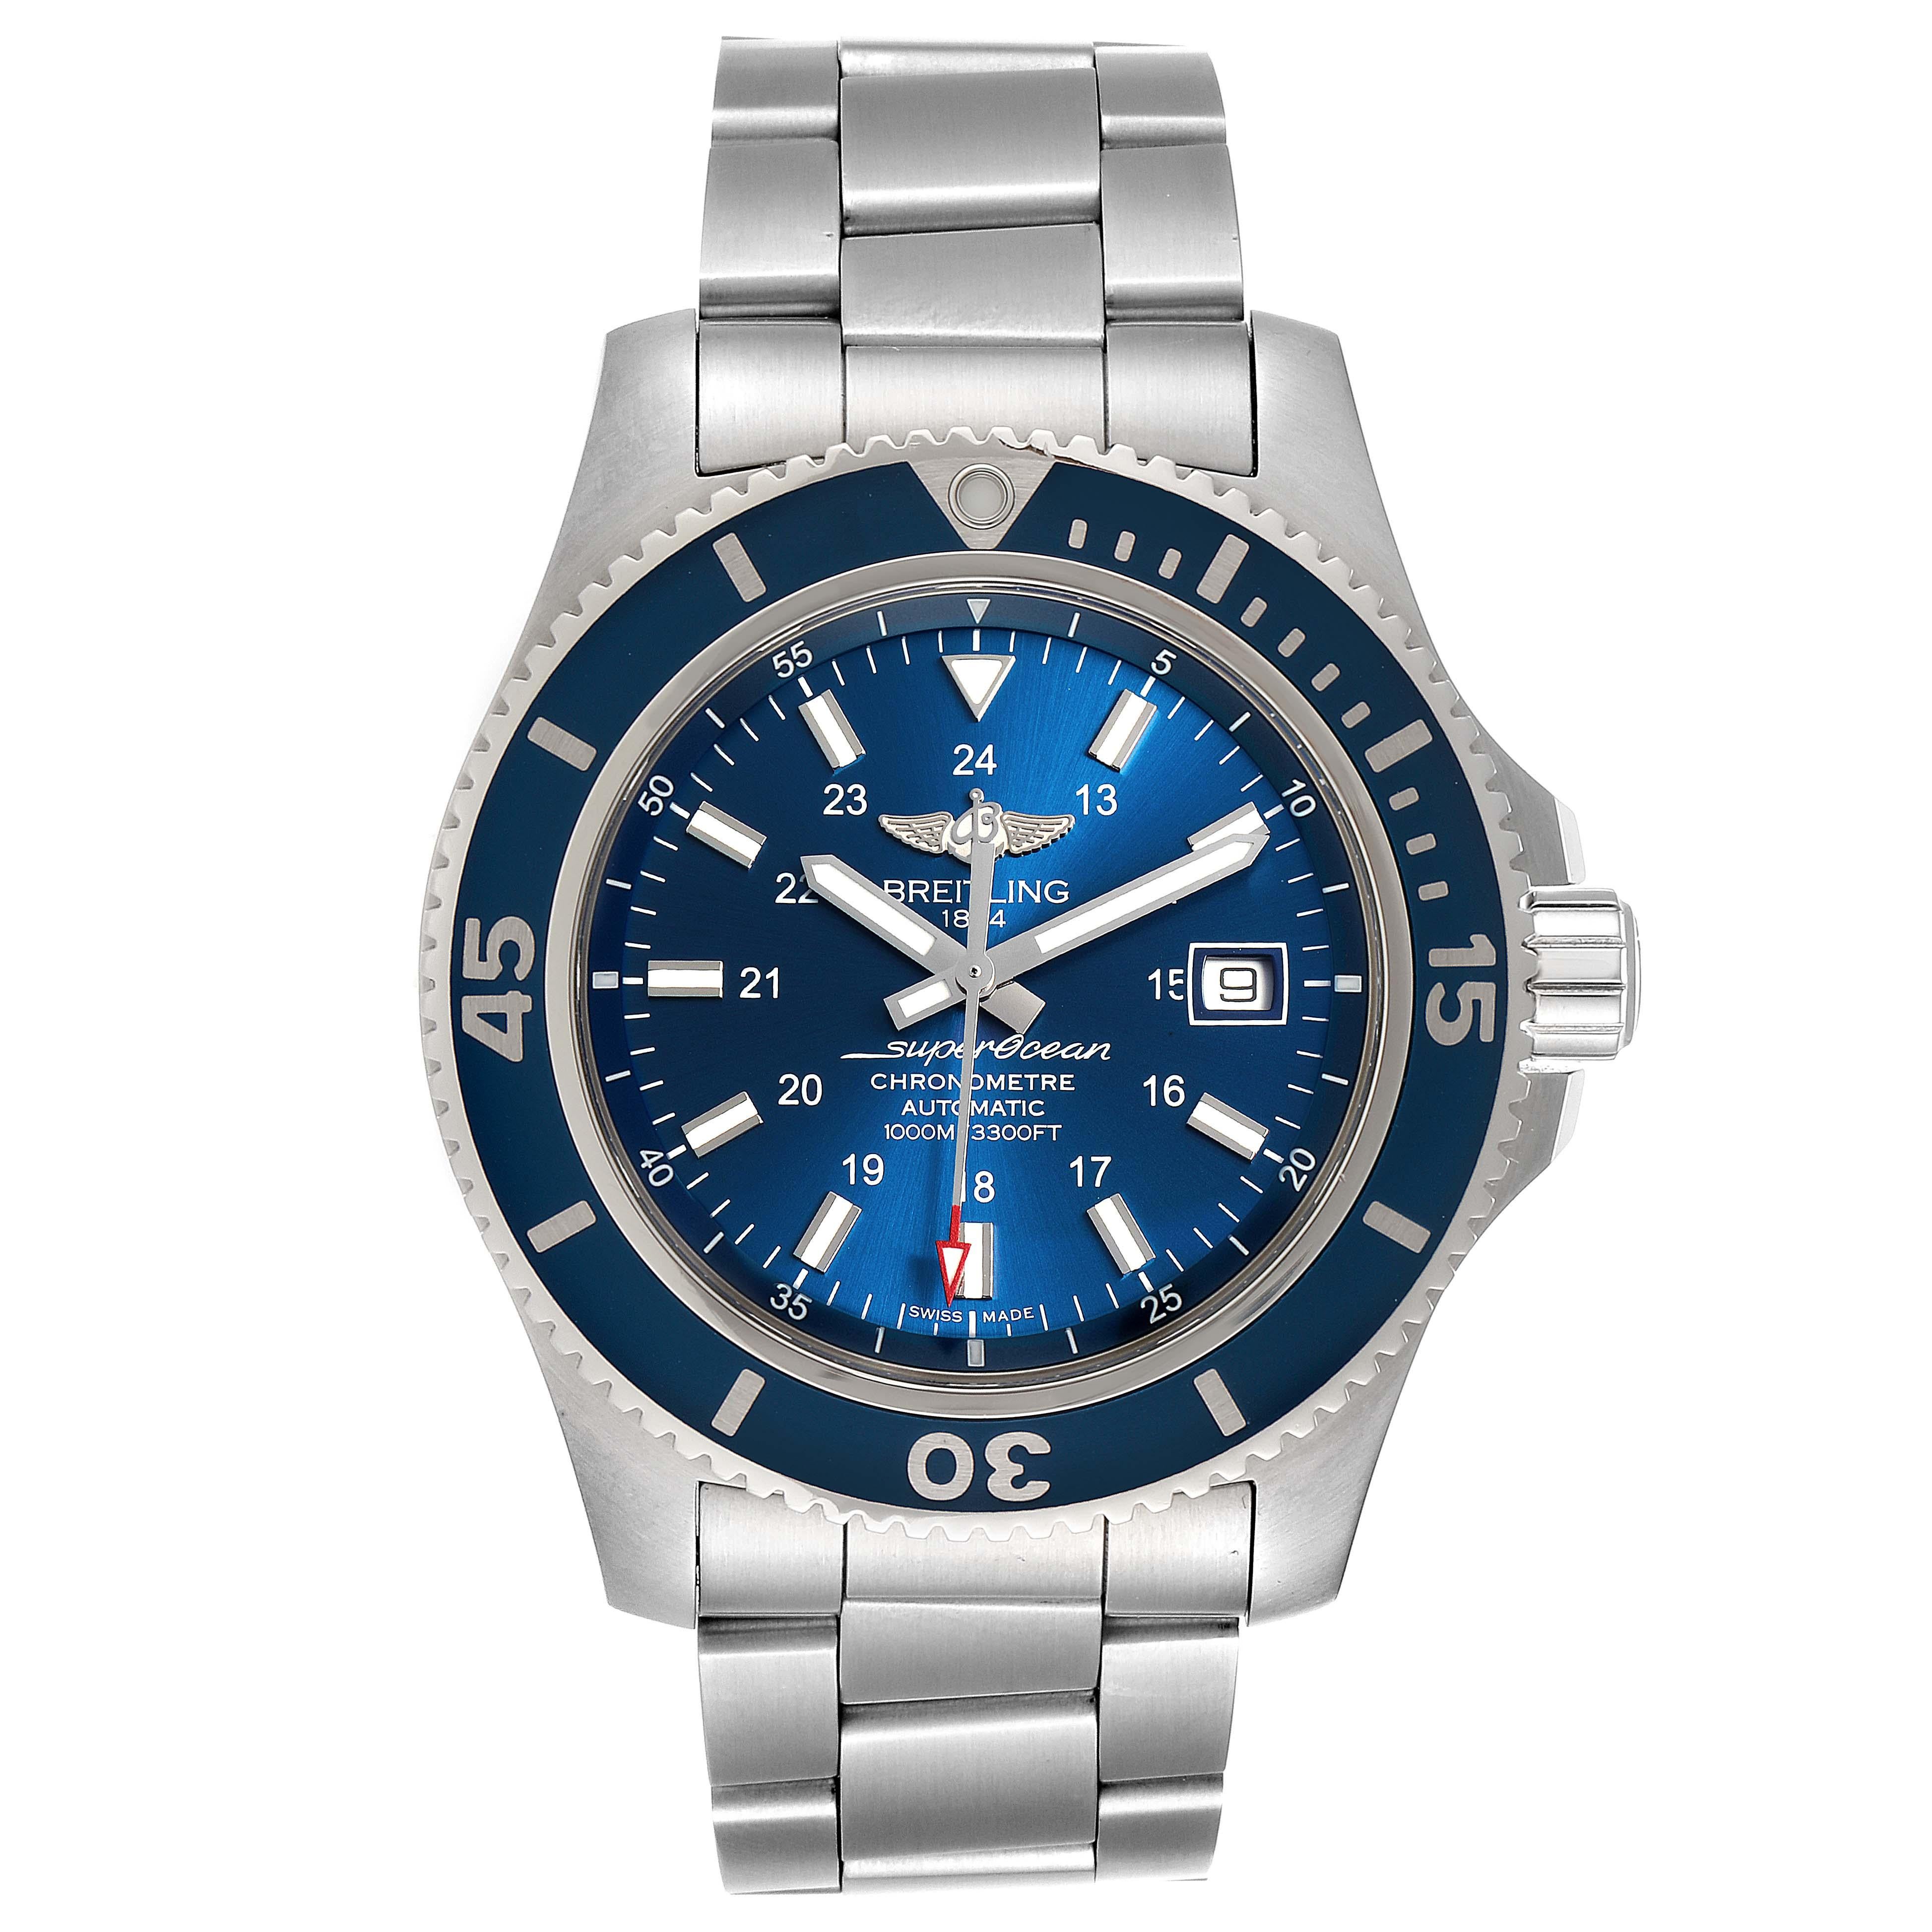 Breitling Superocean II 44 Gun Blue Dial Mens Watch A17392 Box Card. Authomatic self-winding movement. Stainless steel case 44.0 mm in diameter. Case thickness: 14.2 mm. Blue stainless steel unidirectional revolving bezel. 0-60 elapsed-time. Scratch